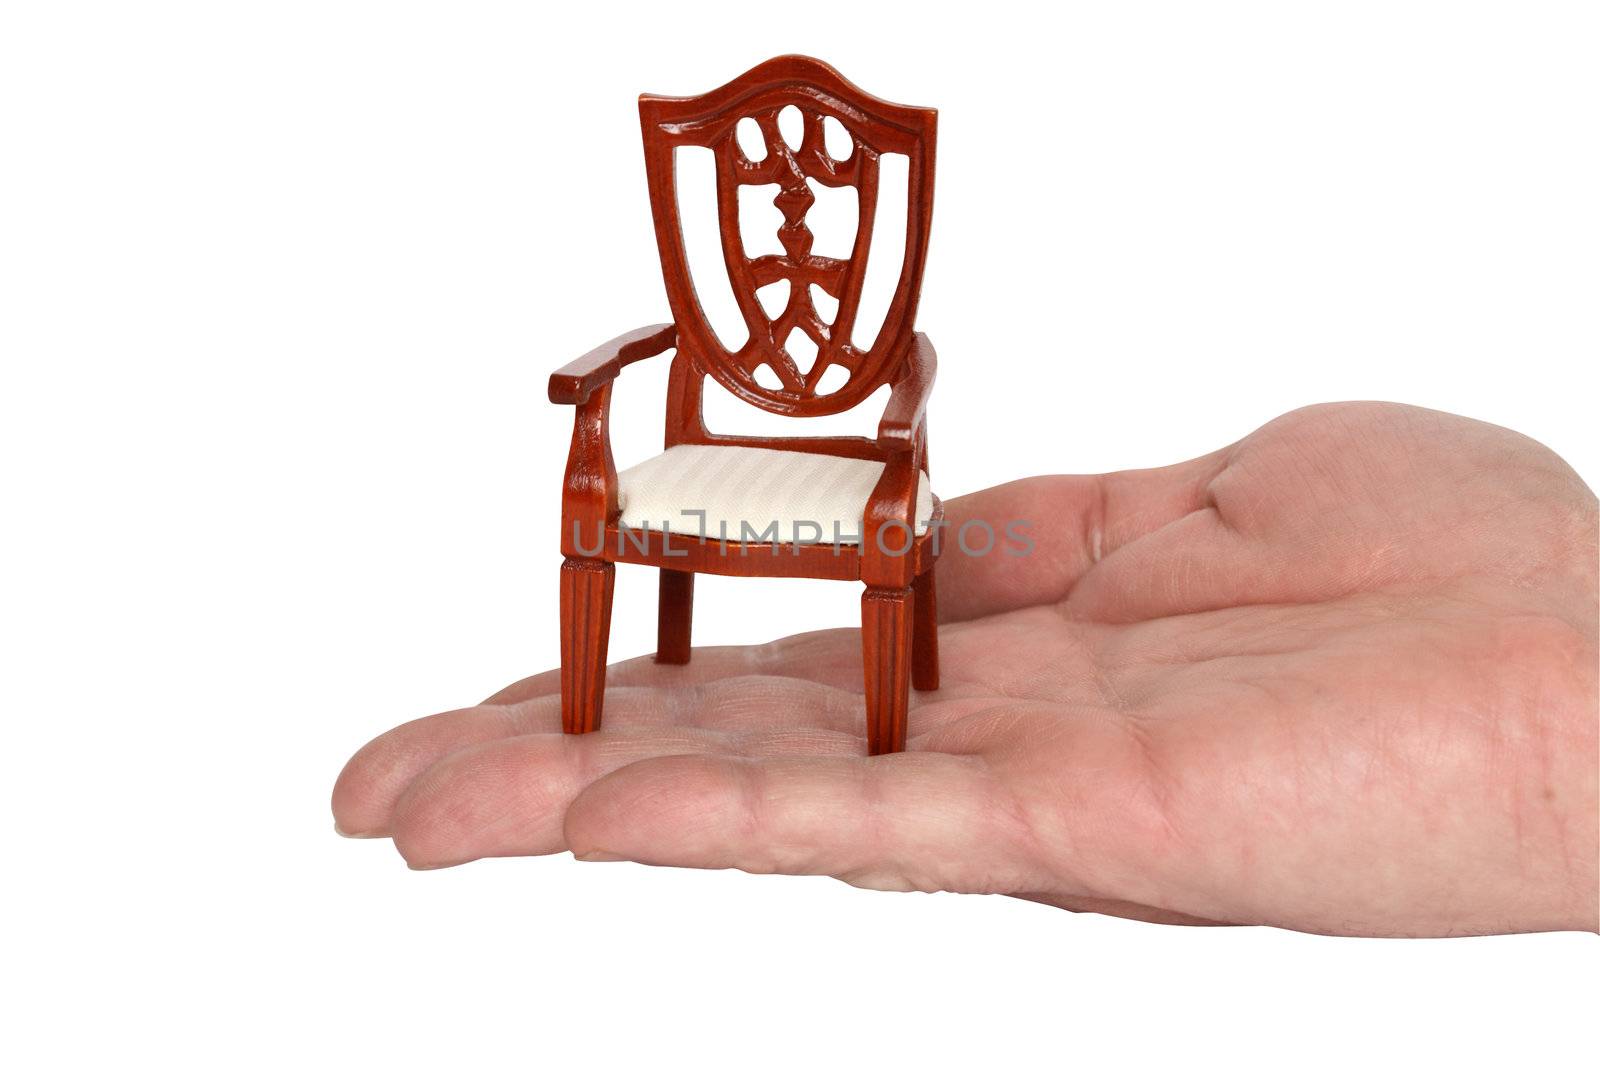 Miniature toy chair standing on human palm. Isolated with clipping path